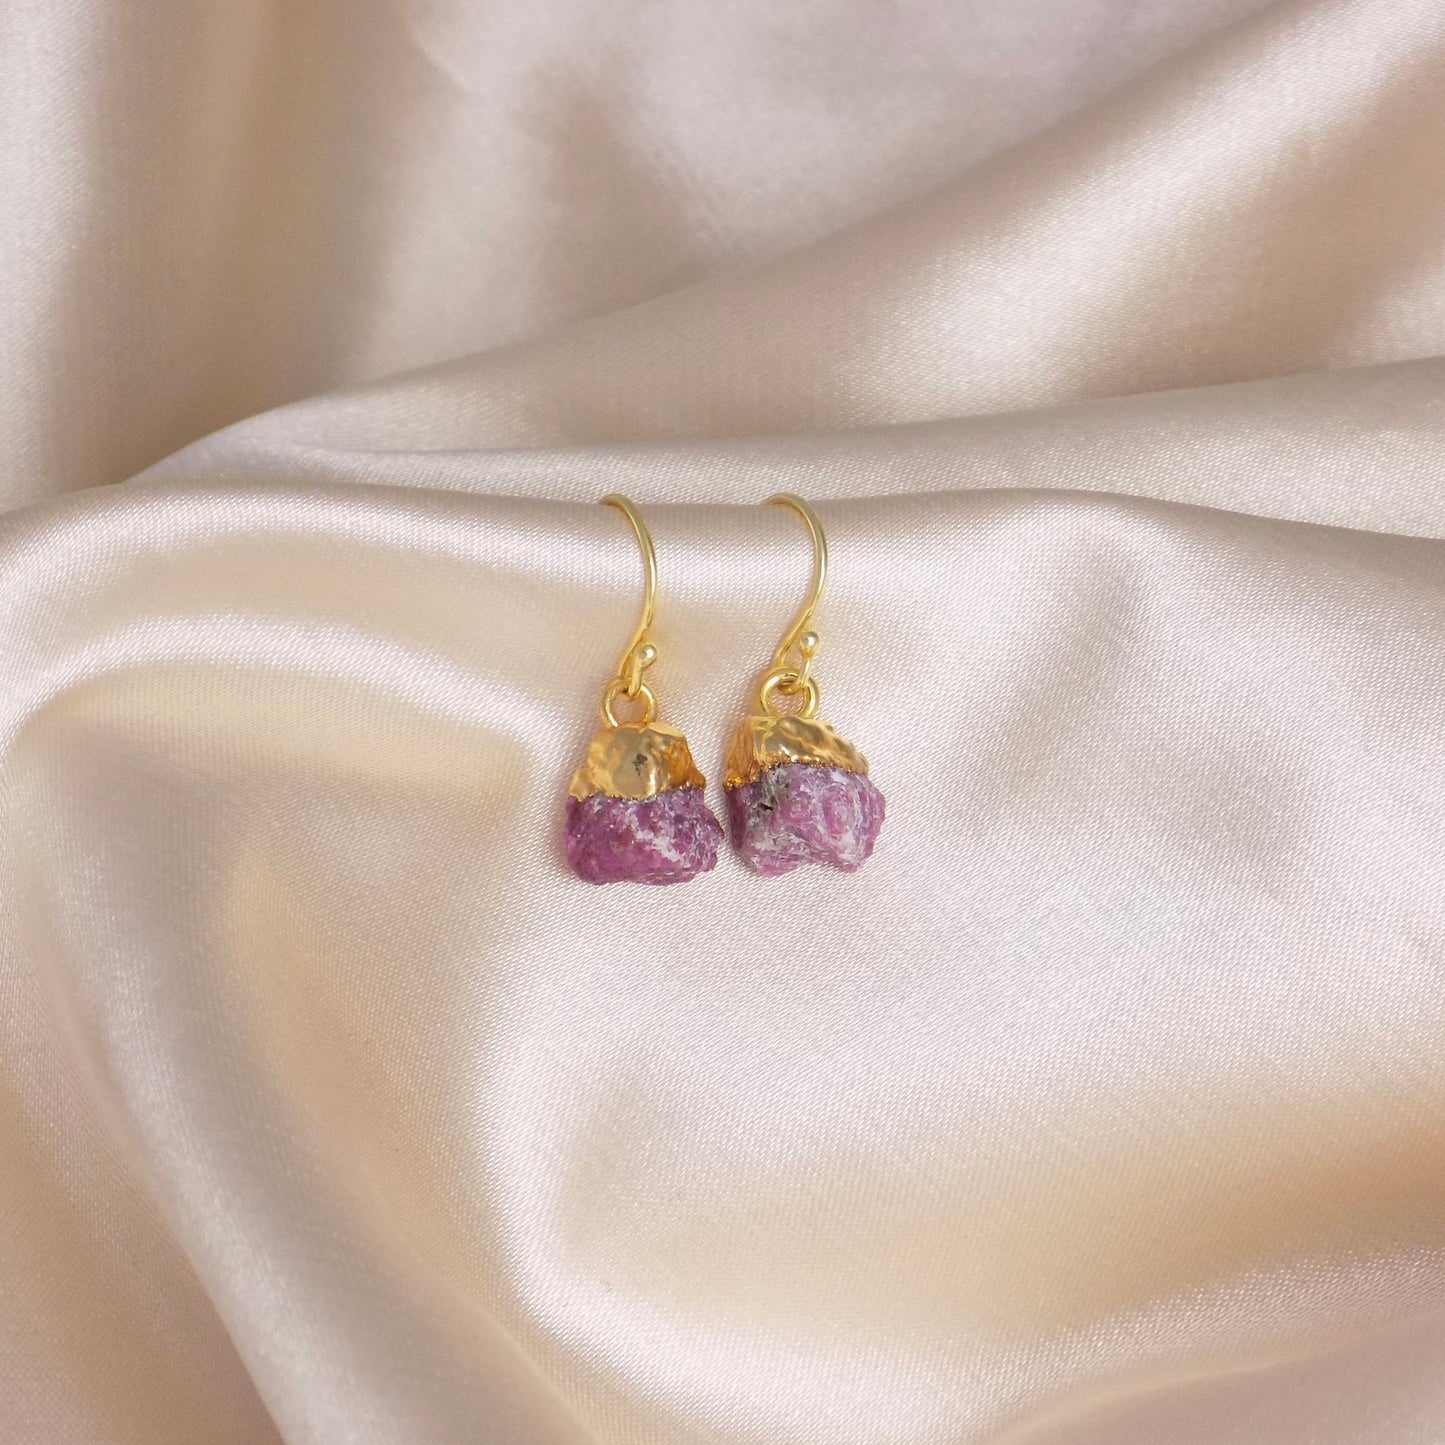 Pink Ruby Earrings Gold, Raw Ruby Gemstone Dangle Drop Earring, Christmas Gifts For Her, M7-60